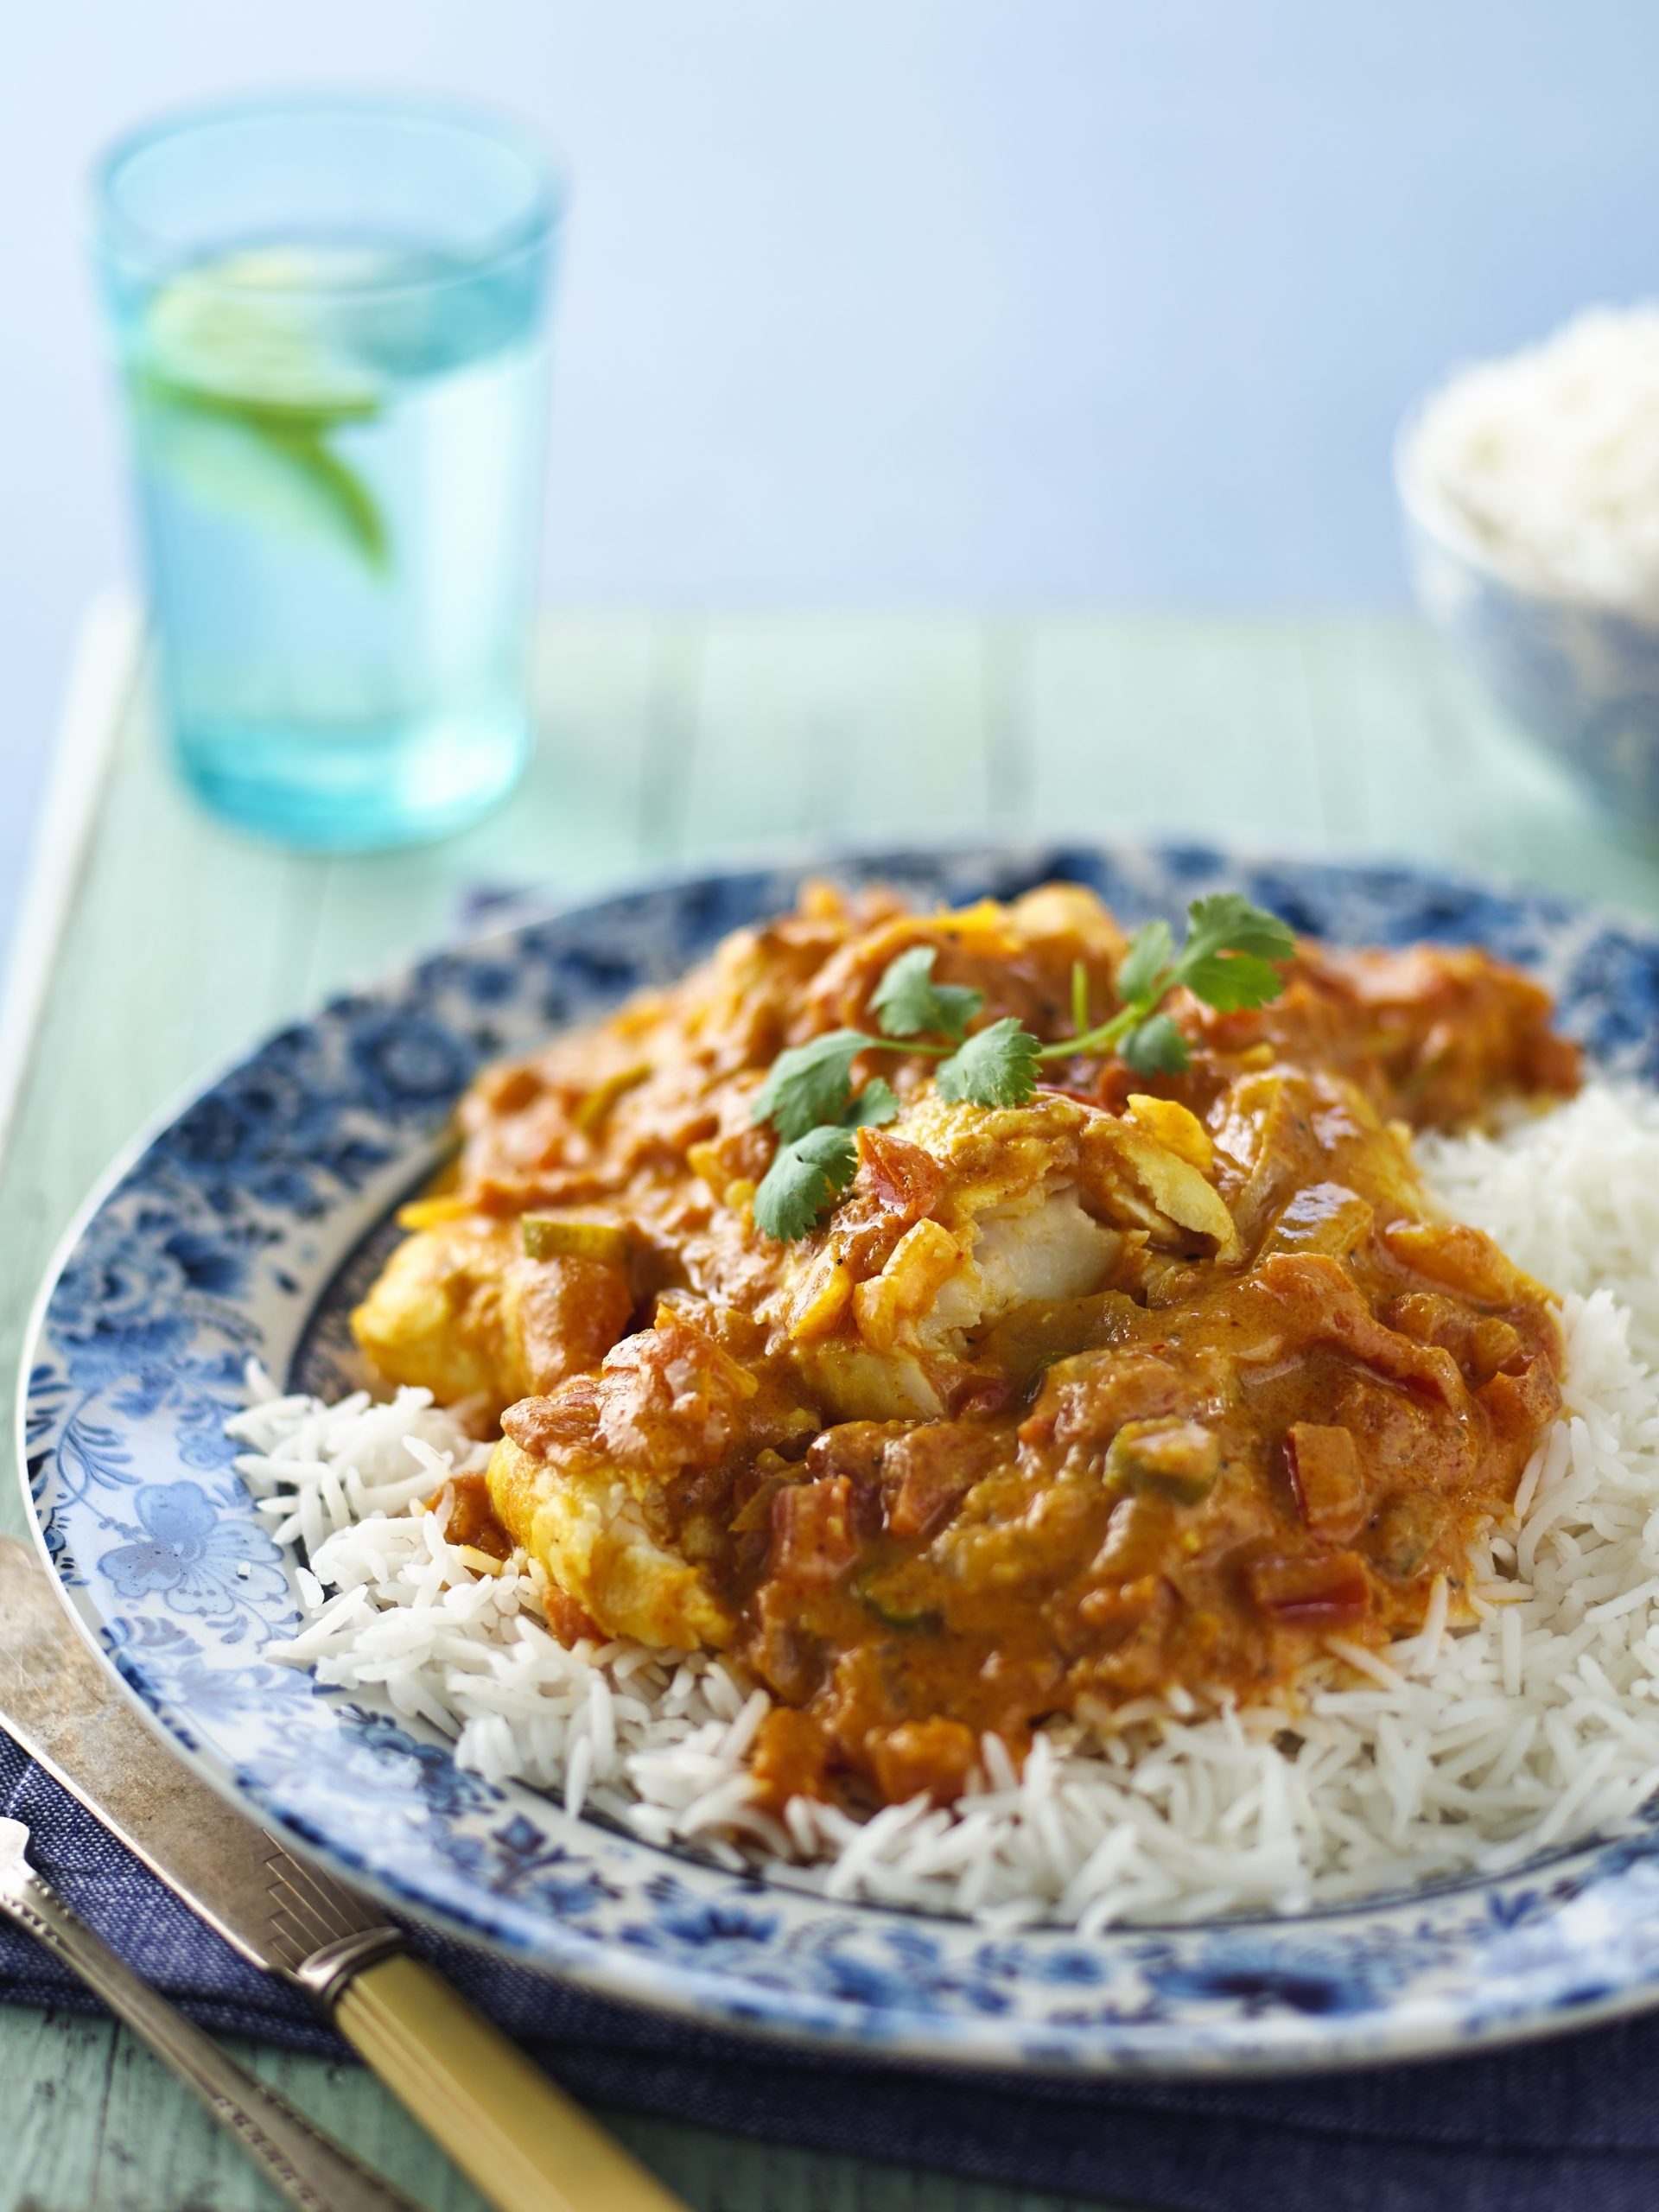 East African Style Fish Curry on Basmati Rice